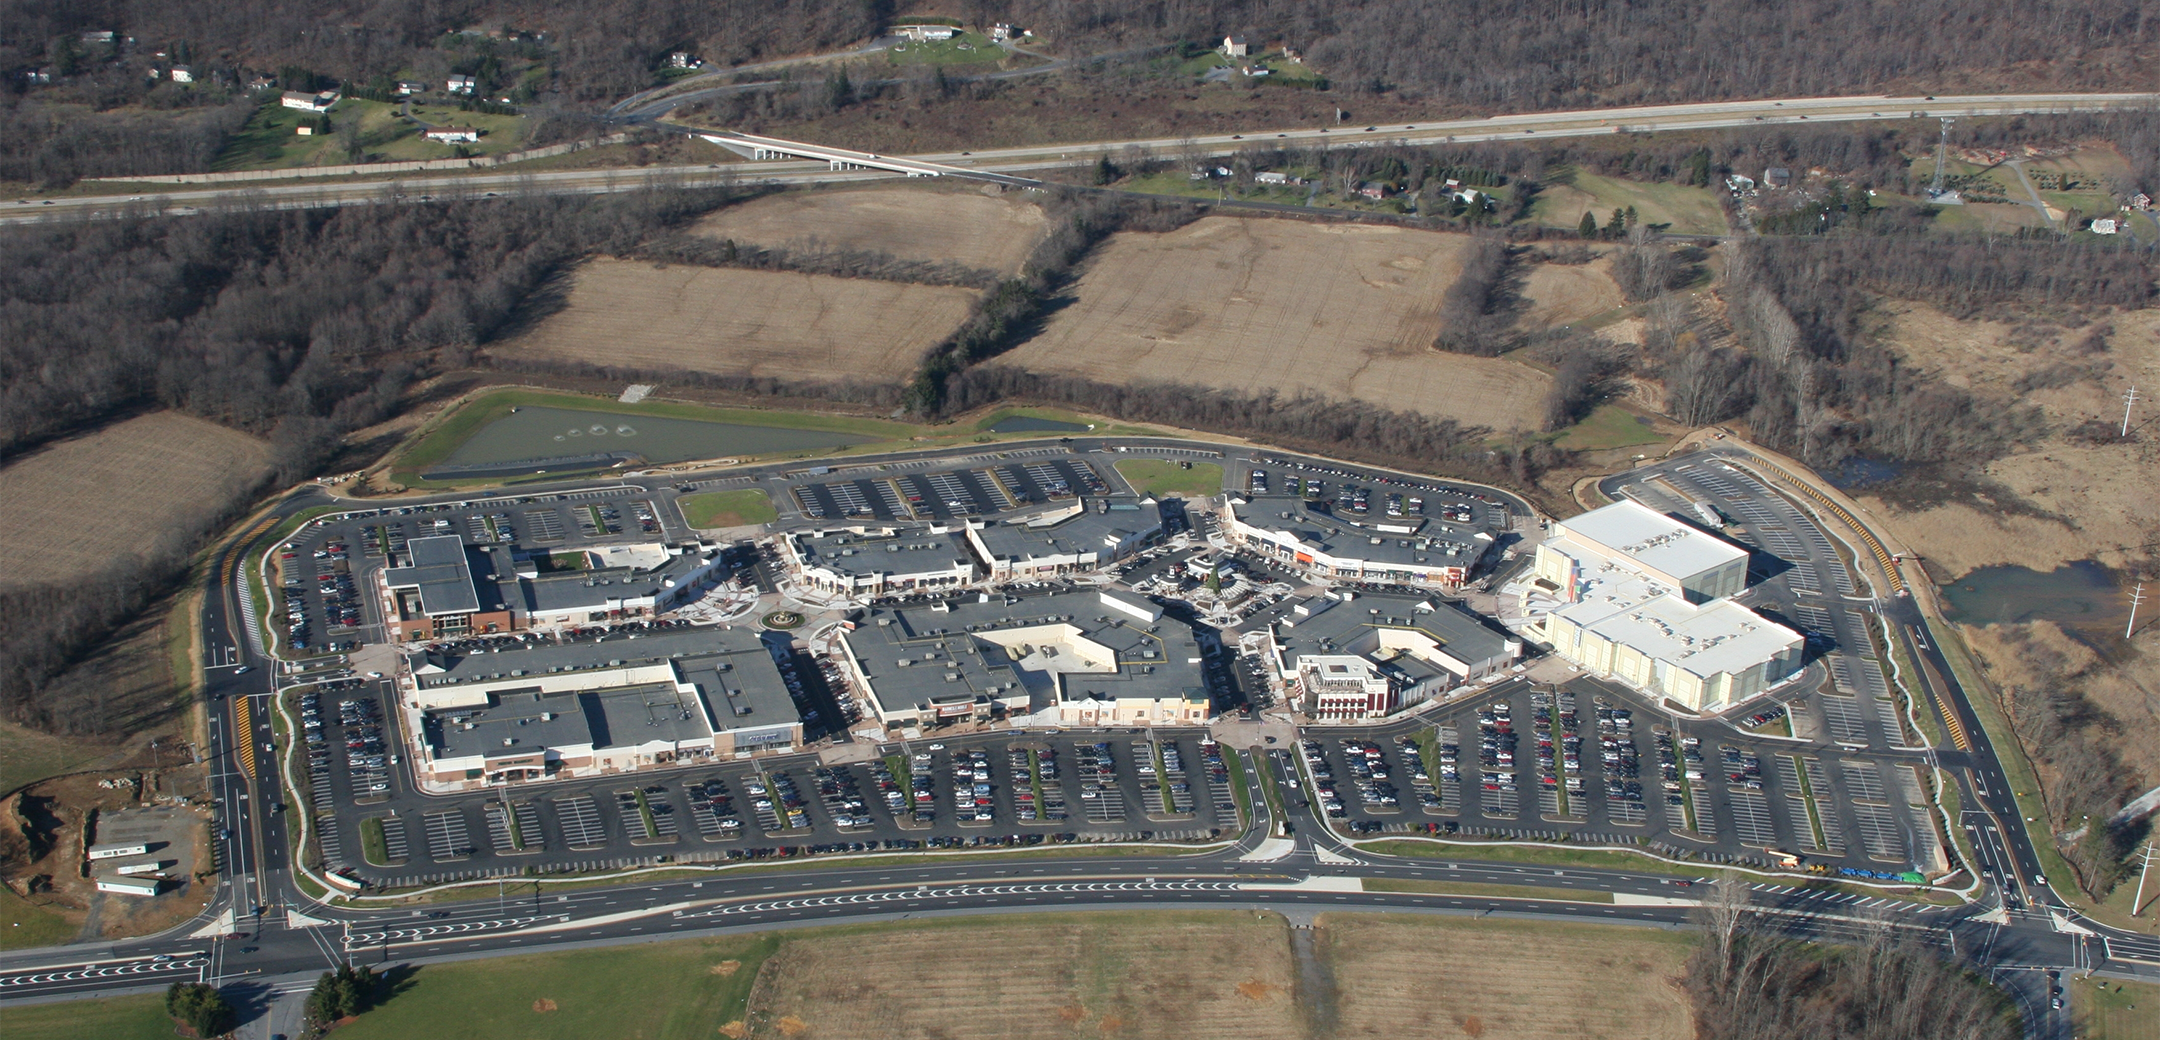 An aerial shot of the Promenade Saucon Valley building, showcasing the large layout with walkways inside, parking amendments surrounding the buildings, and forested general area.